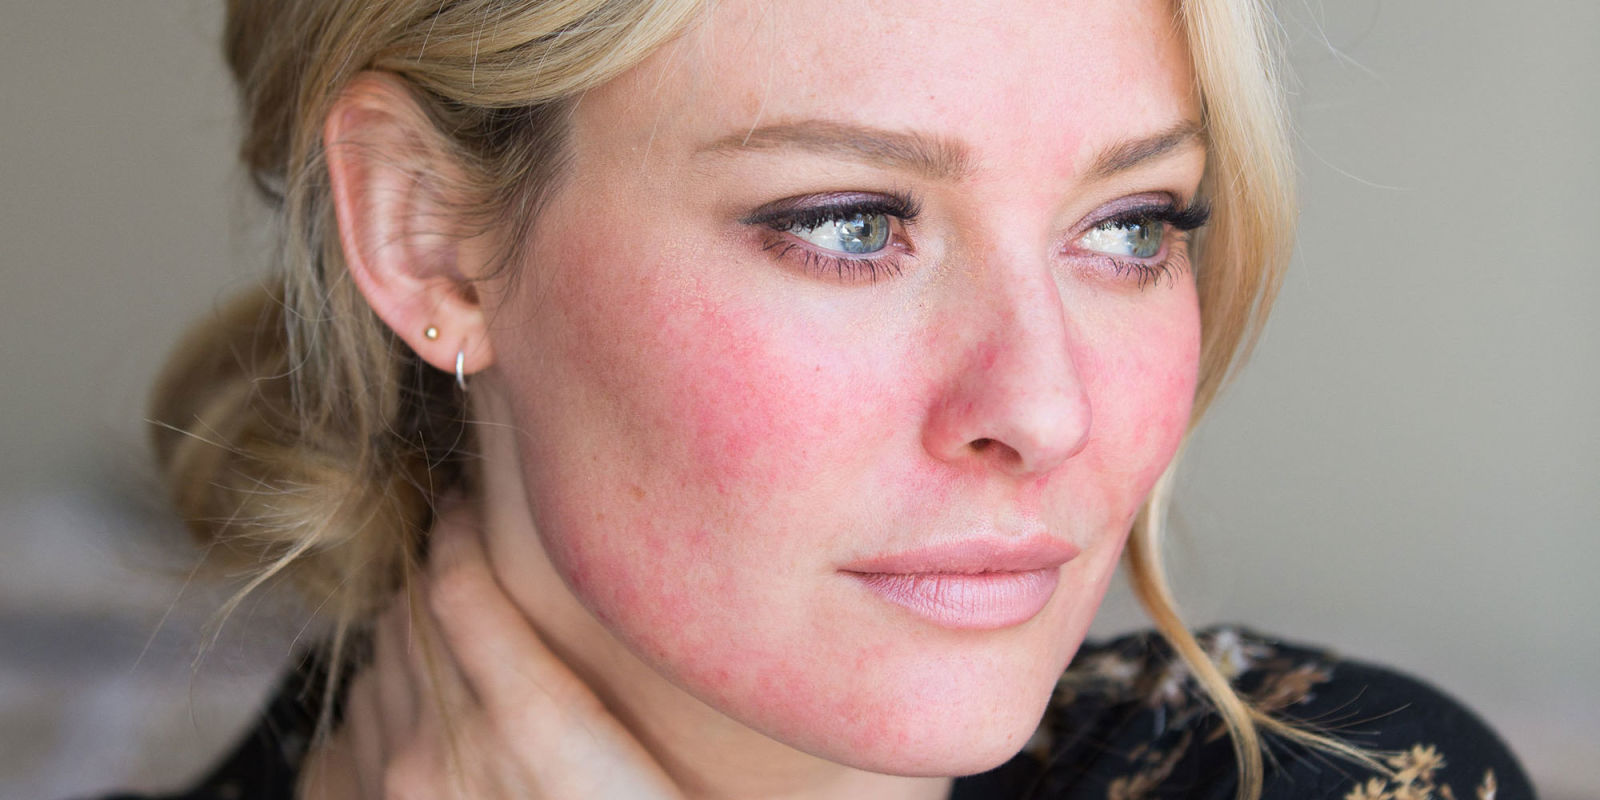 How Can Rosacea-Condition Be Well-Treated By Chemical Peels?